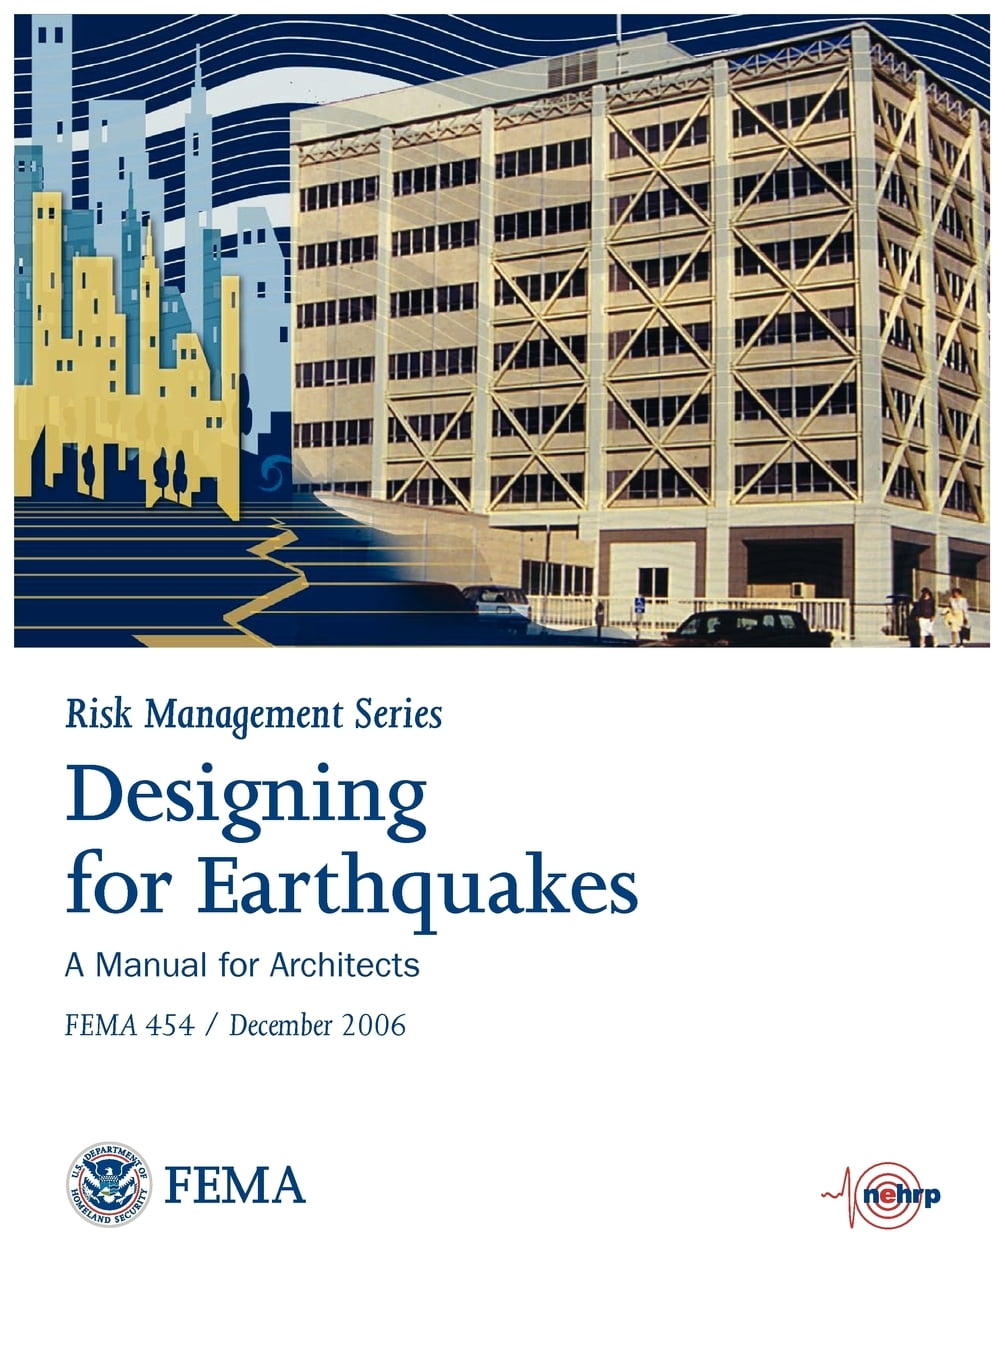 Designing-for-Earthquakes-A-Manual-for-Architects-Fema-454--December-2006-Risk-Management-Series